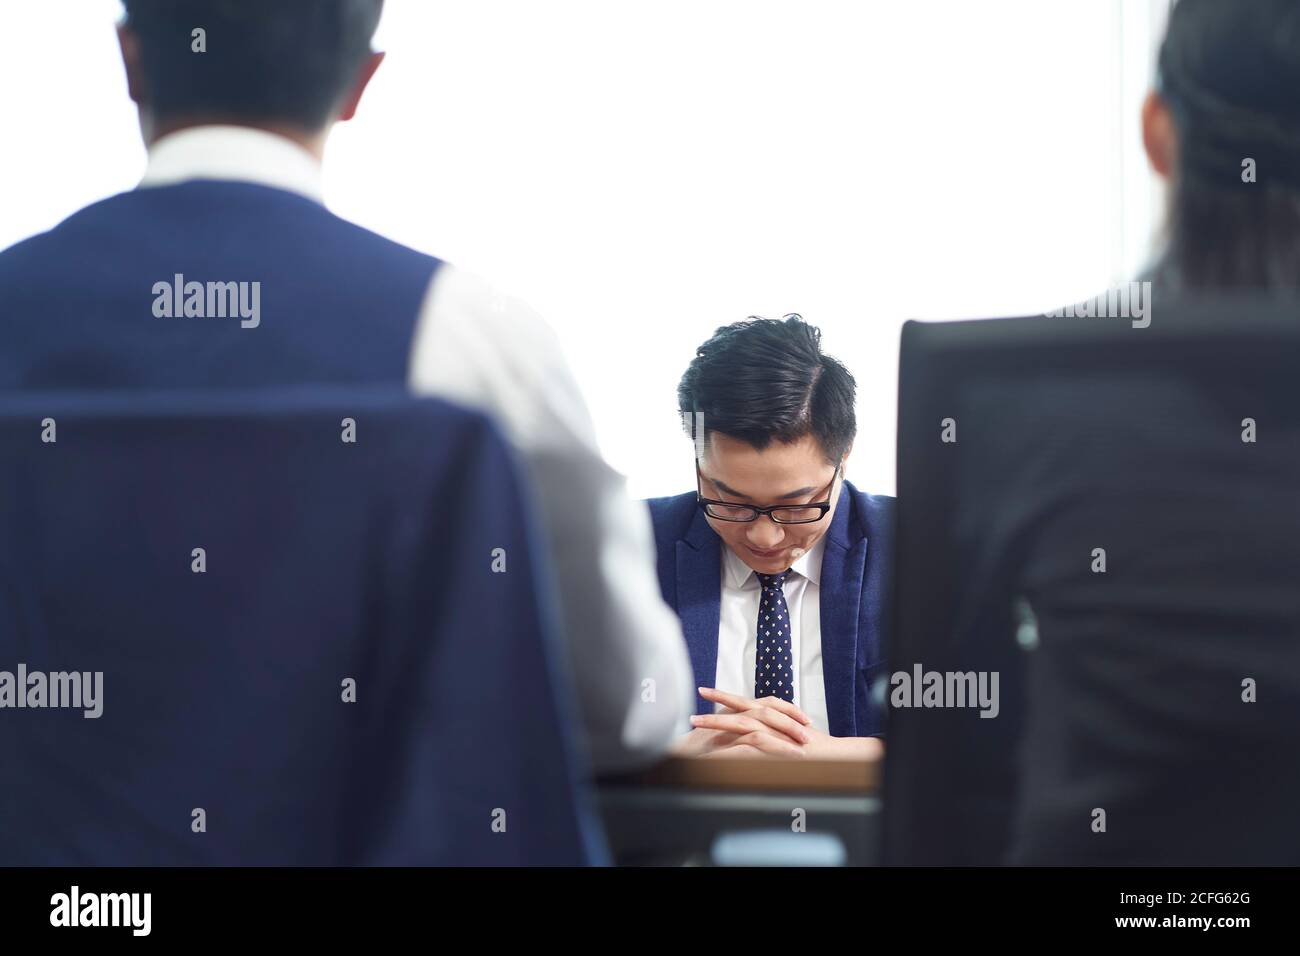 young asian business man looking sad after learning termination of employment Stock Photo